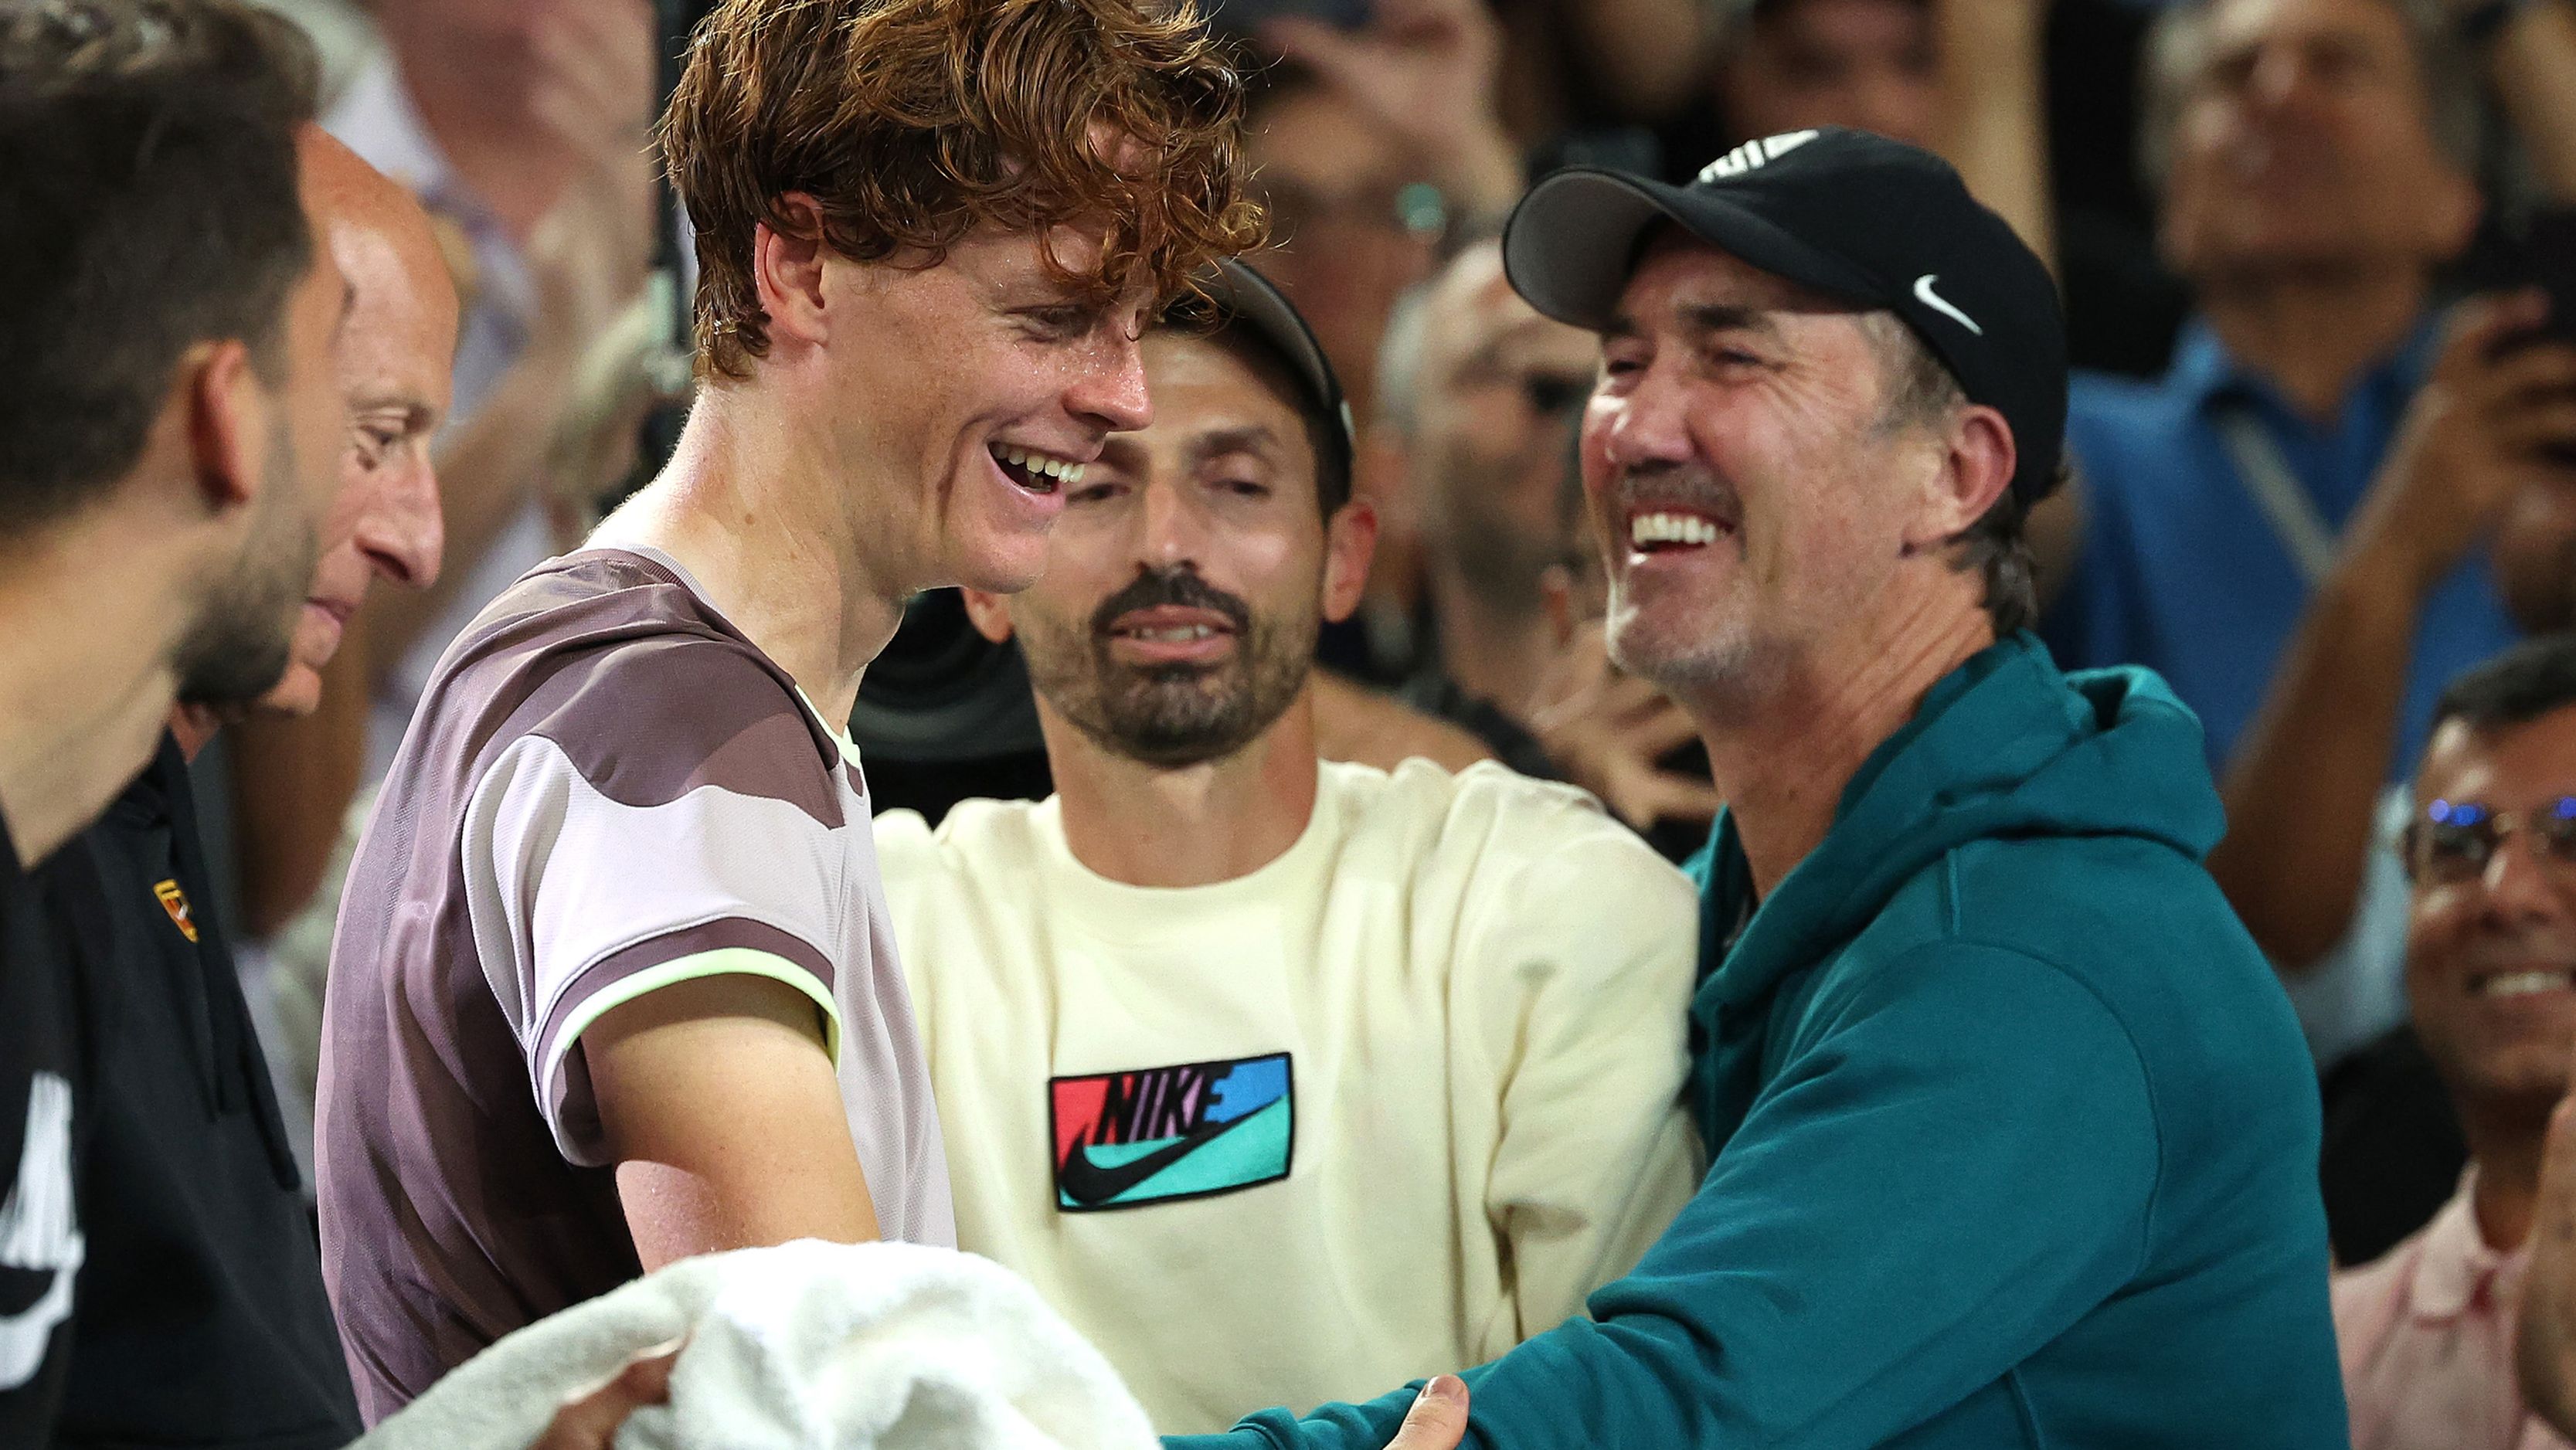 Jannik Sinner of Italy celebrates winning with coach Darren Cahill and his team.